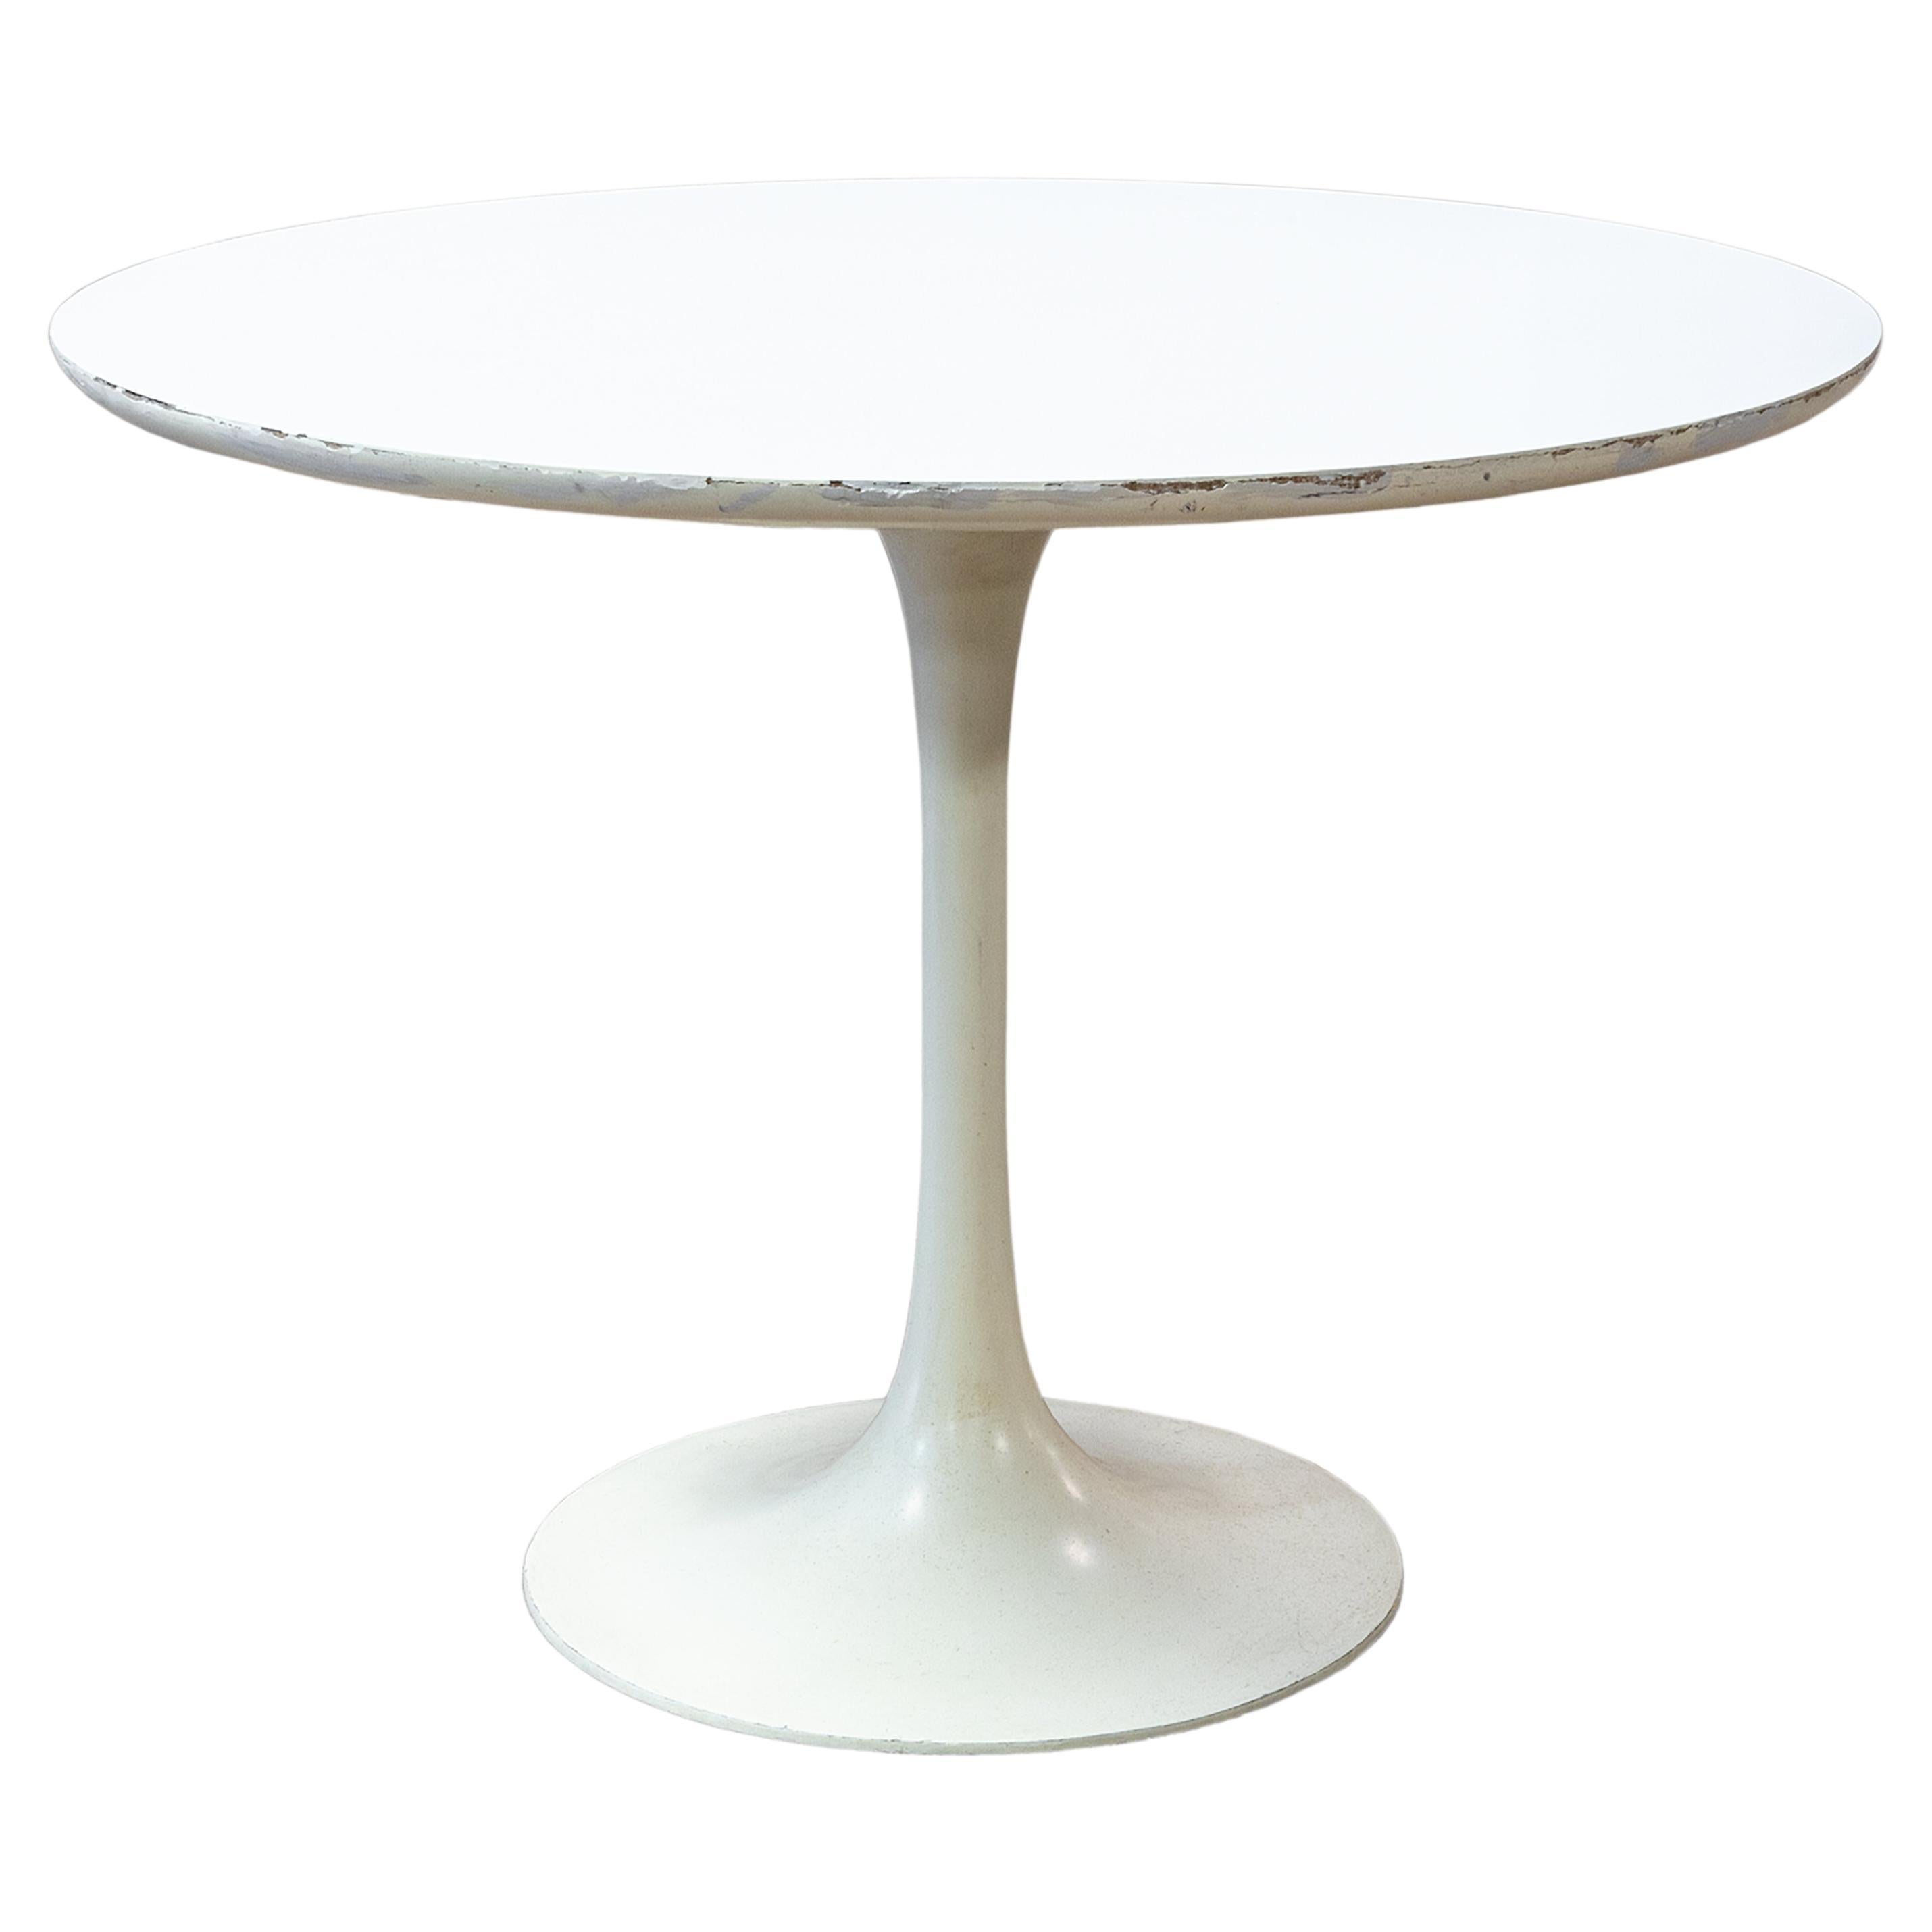 Are tulip tables sturdy?